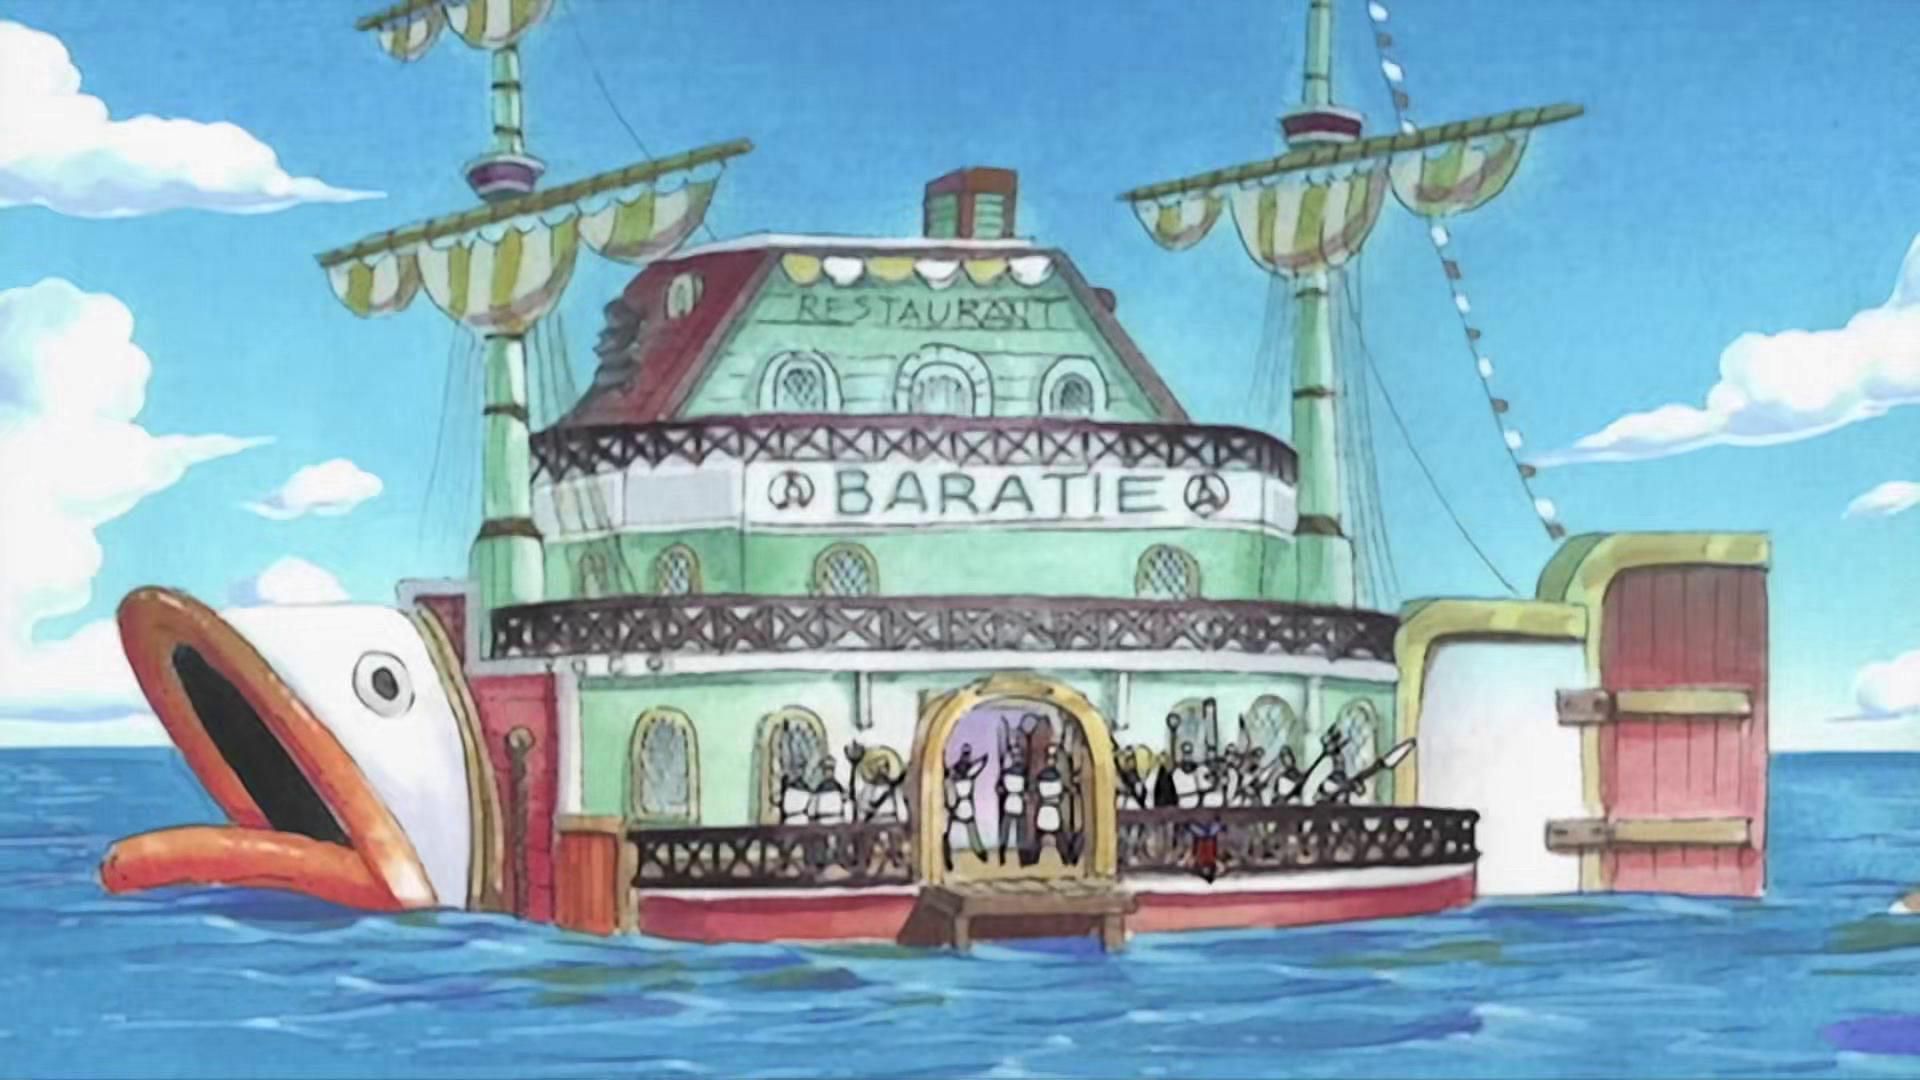 The Baratie set is chiefly featured in the latest news from Netflix&#039;s One Piece live-action series (Image Credits: Eiichiro Oda/Shueisha, Viz Media, One Piece)